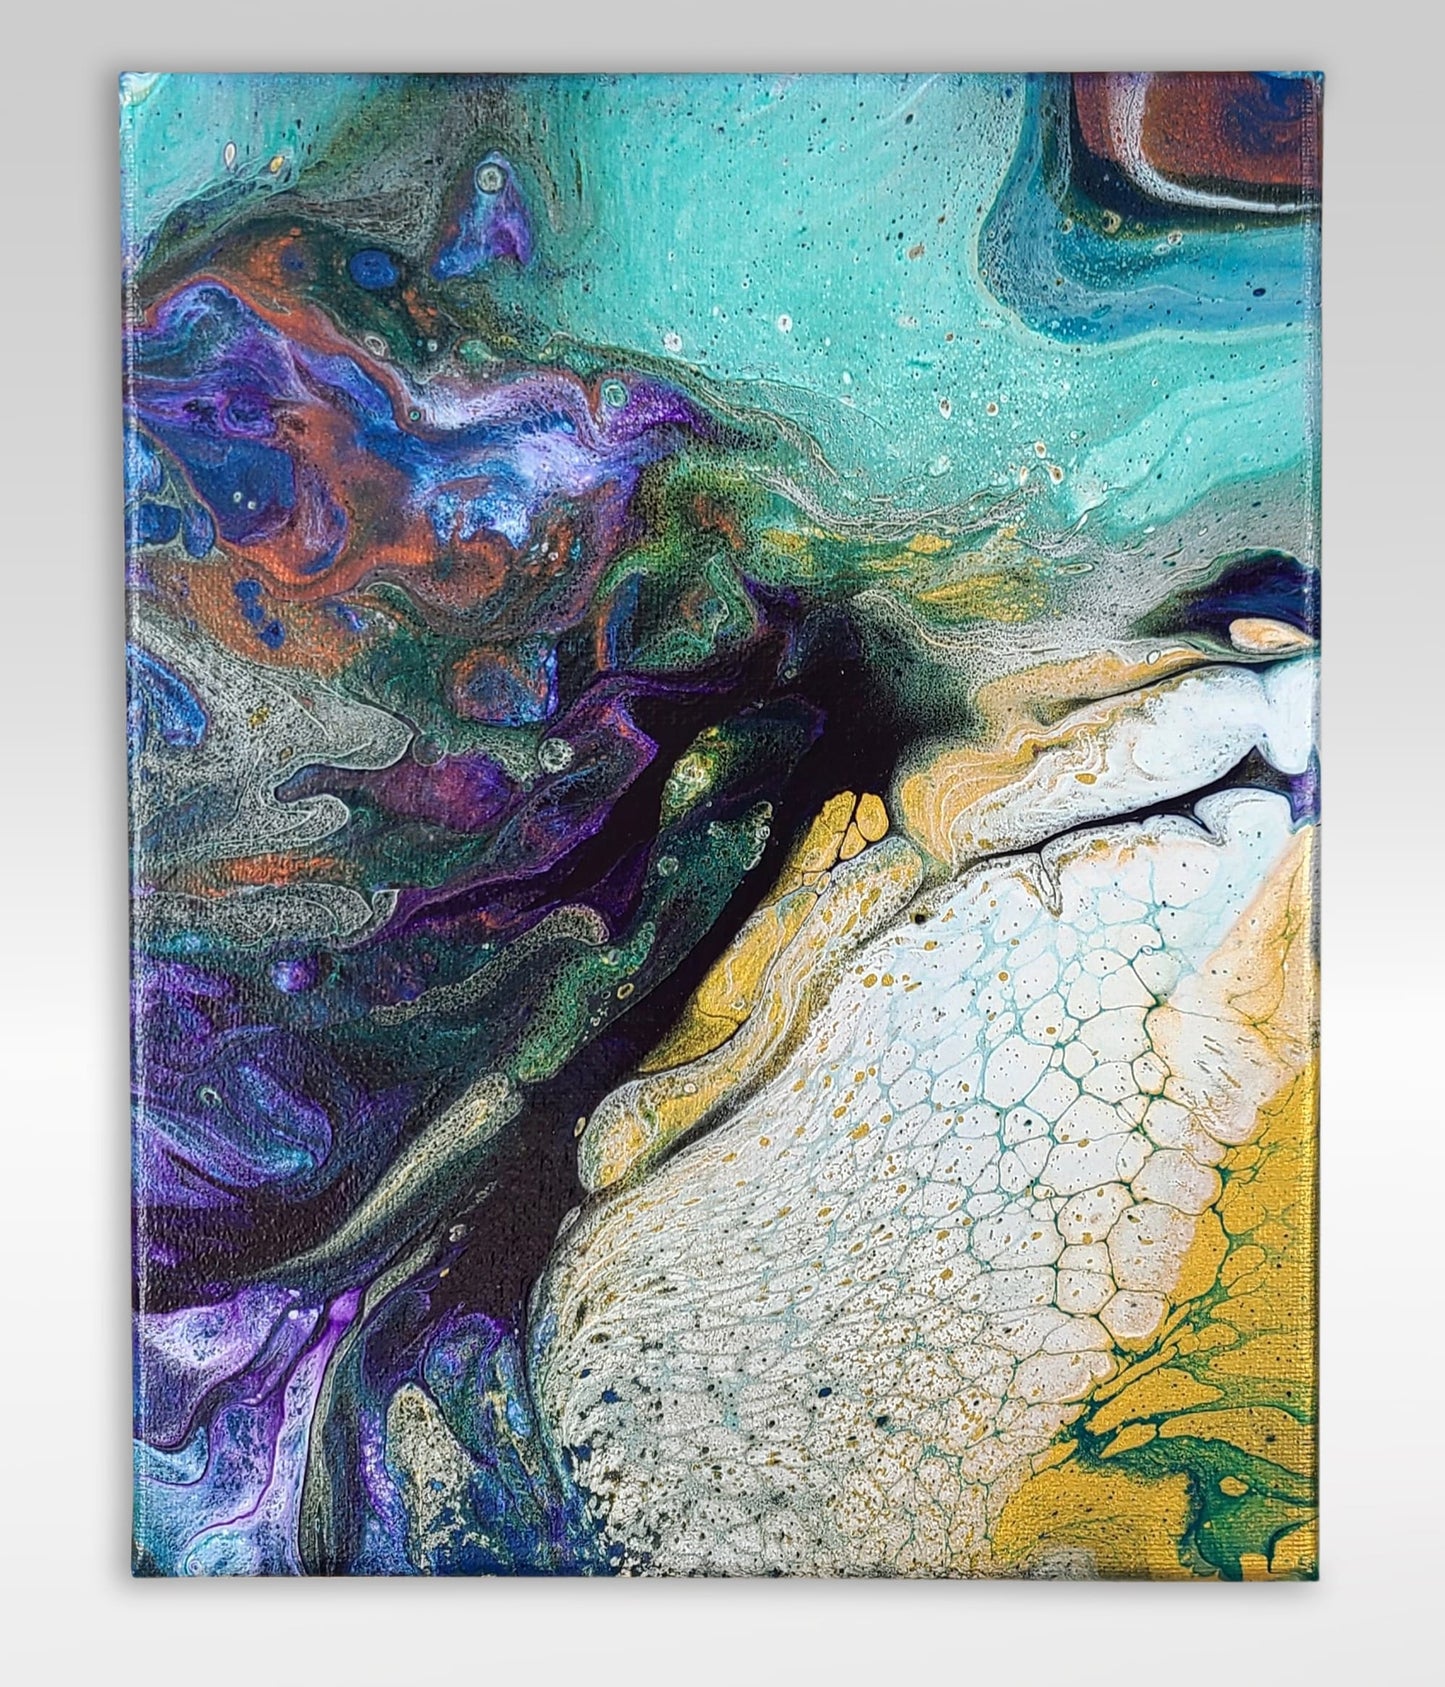 Gravitational Pull – 8 x 10 Acrylic Pour Painting On Canvas